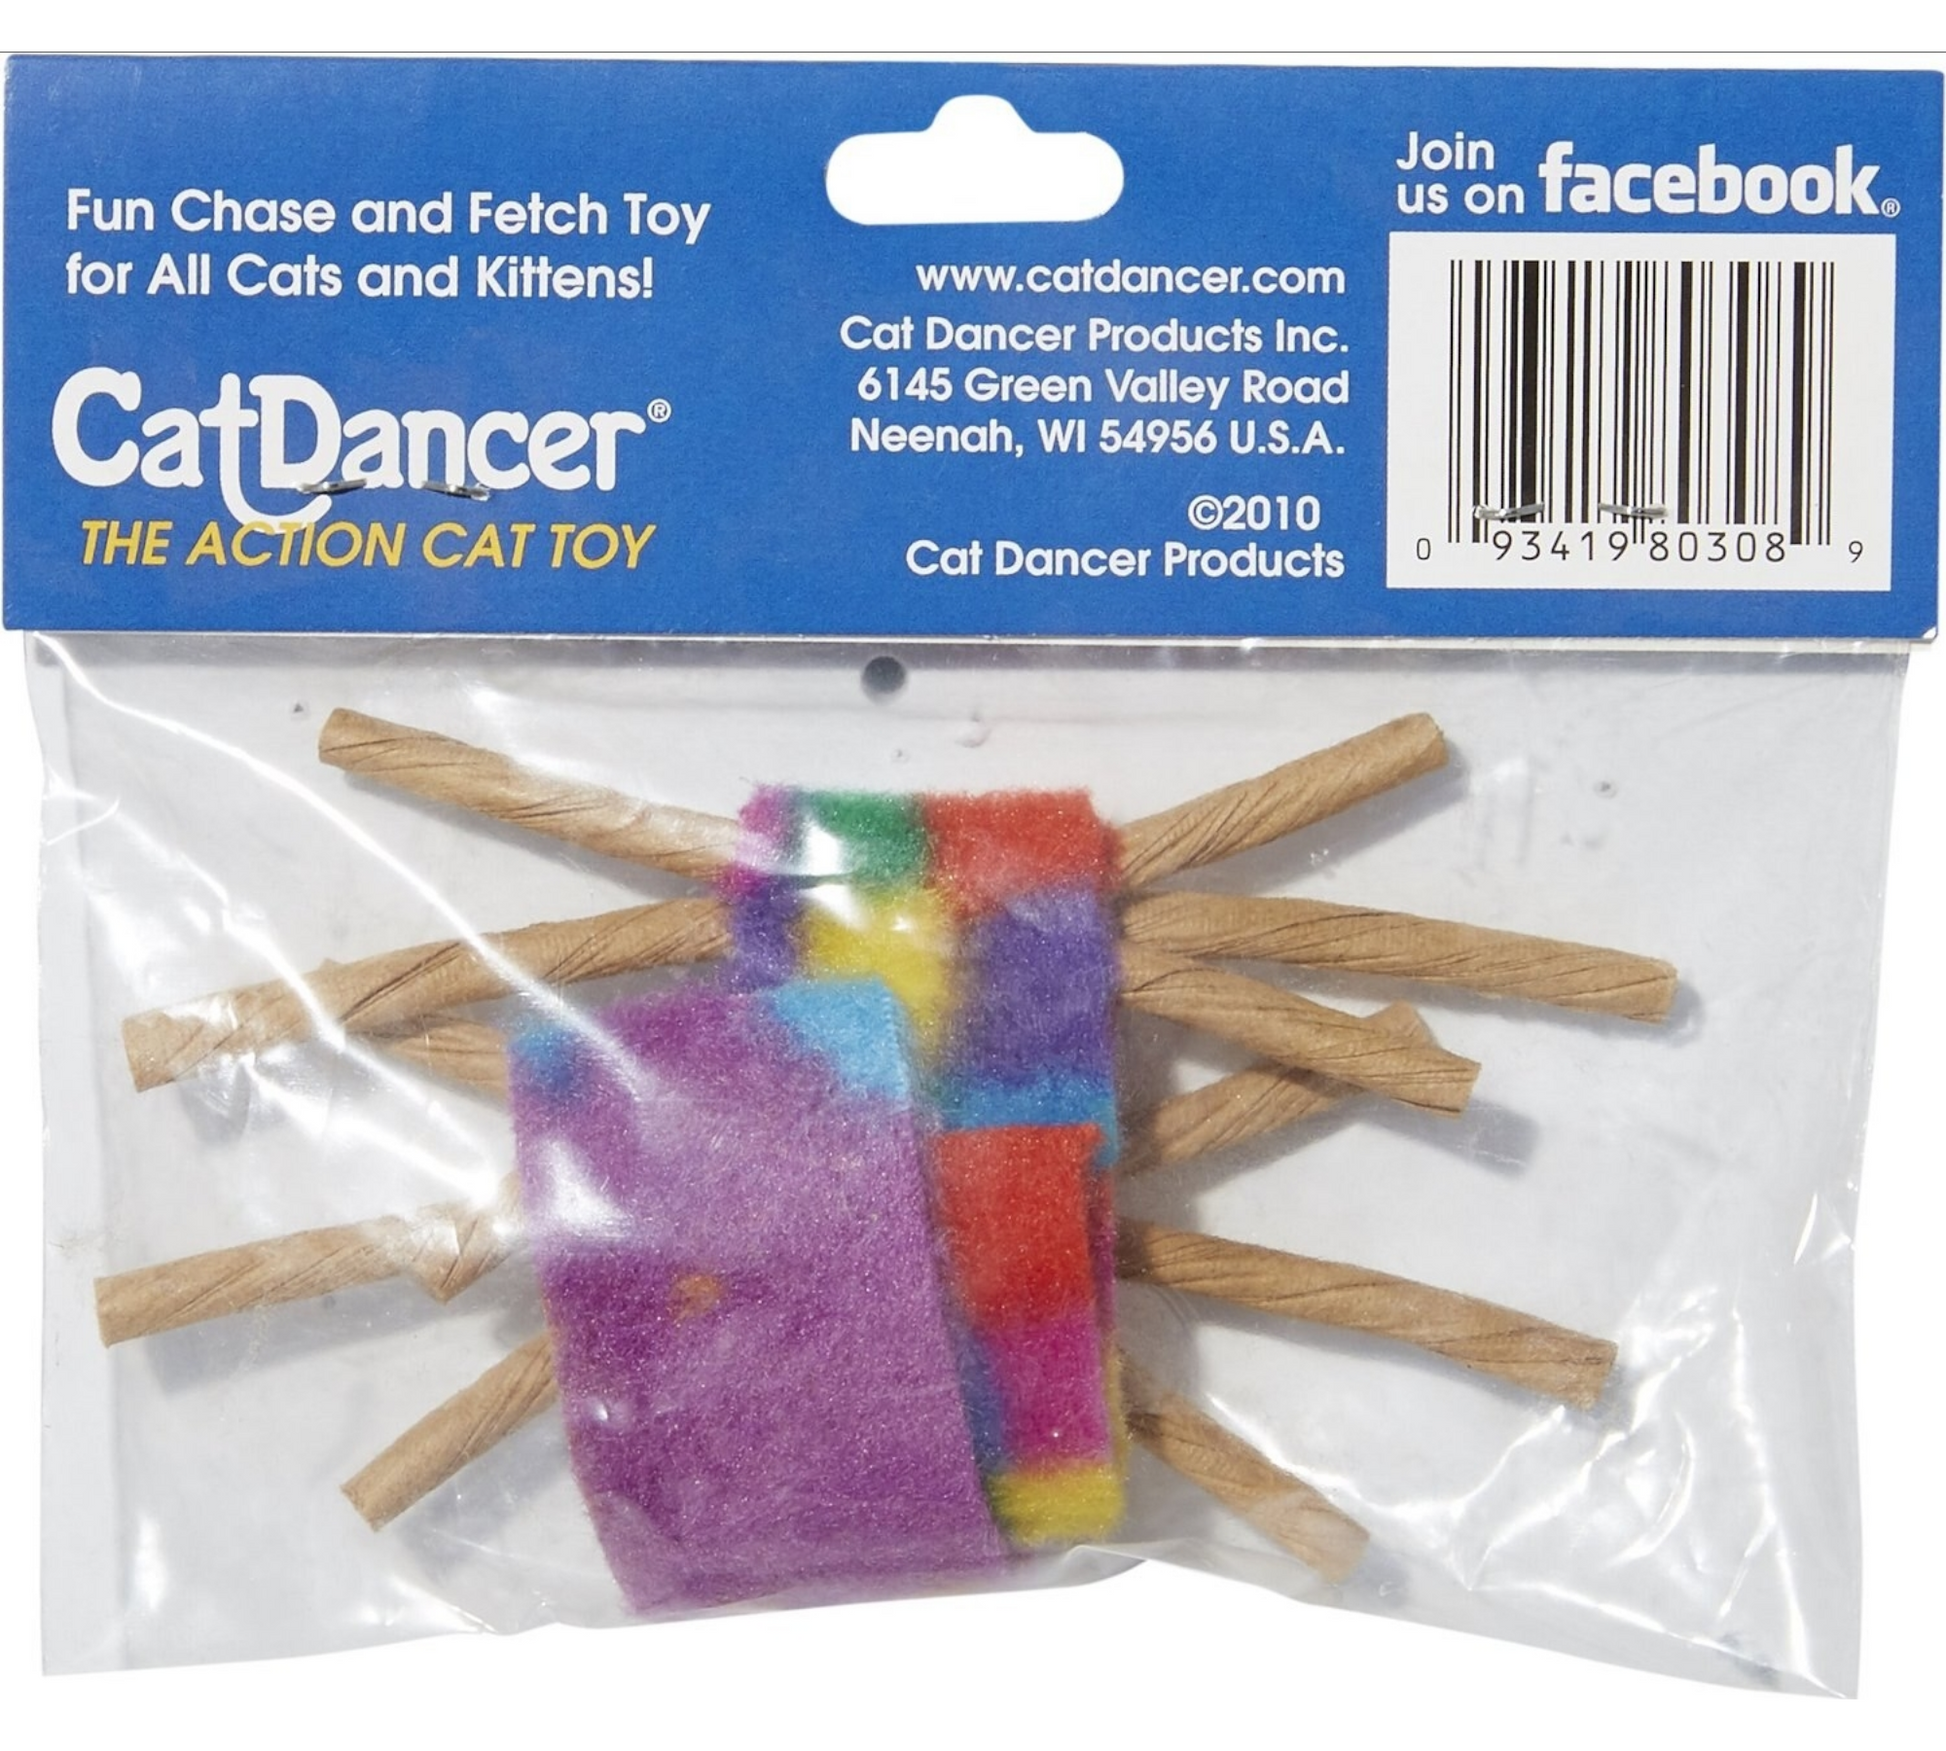 Canine's World Cat Balls & Chaser Toys Cat Dancer Whisker Chasers Cat Toy, 2 count Cat Dancer